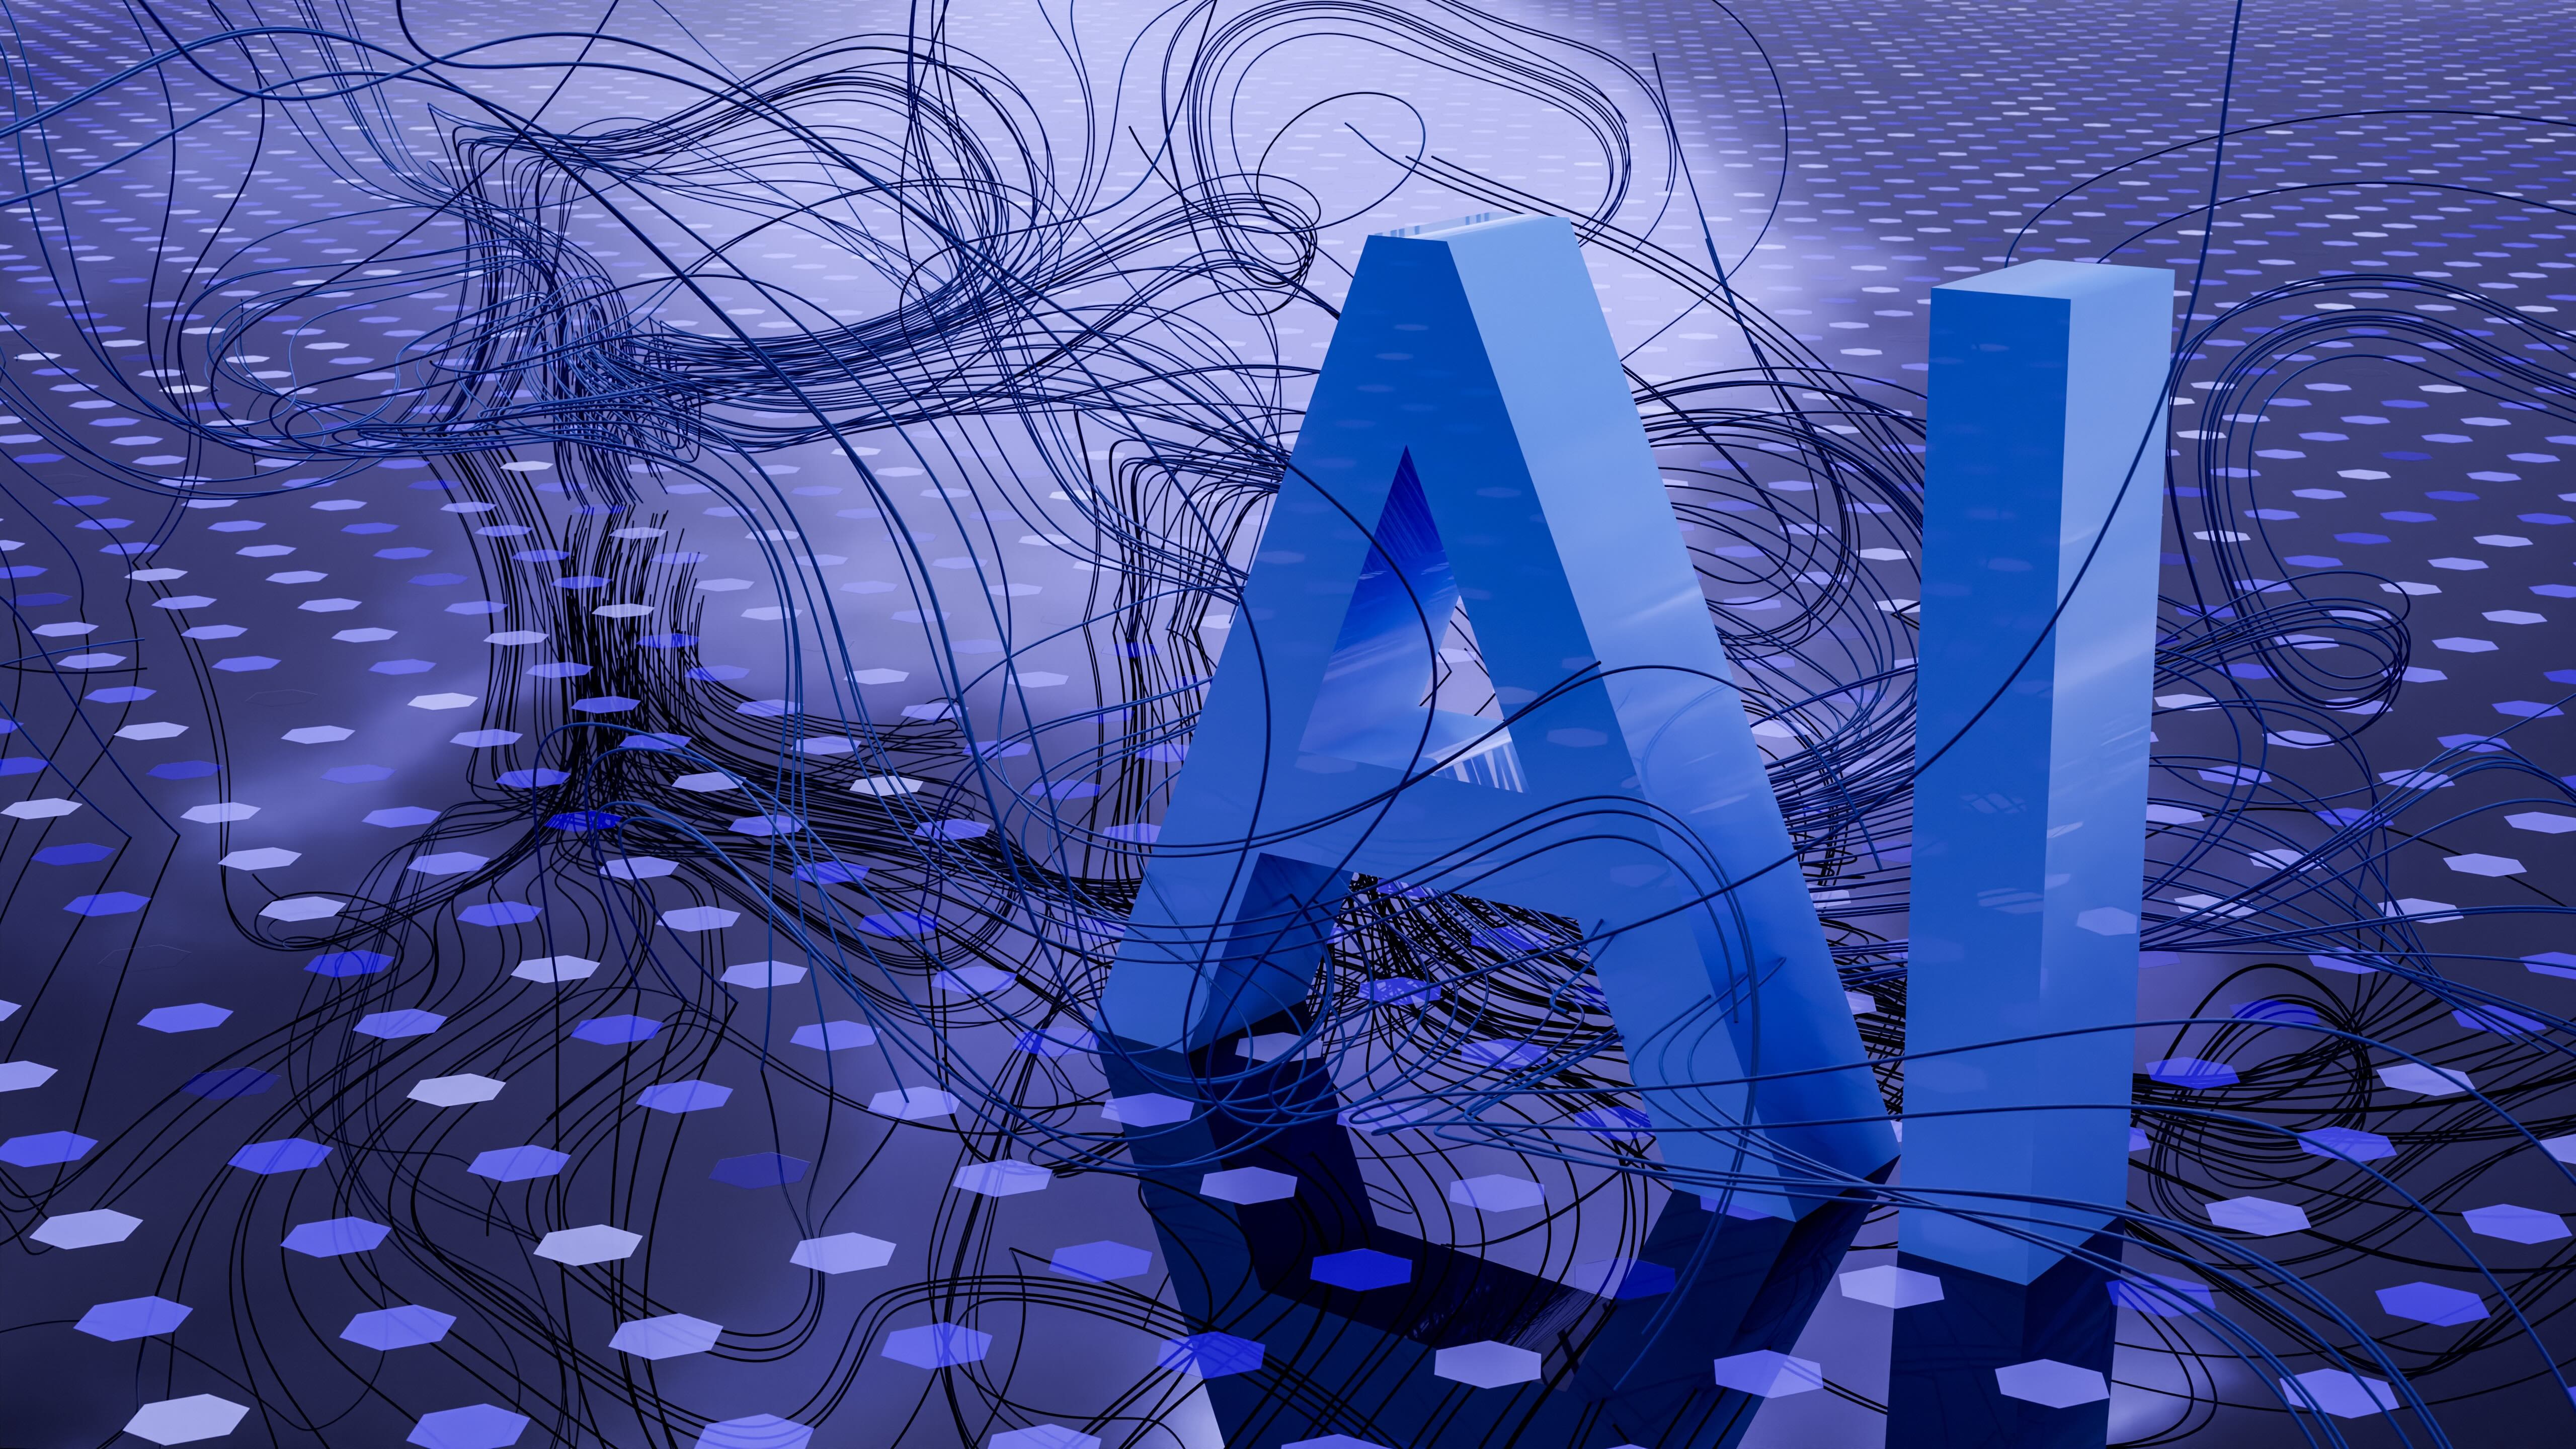  3D block letters "AI" in abstract setting